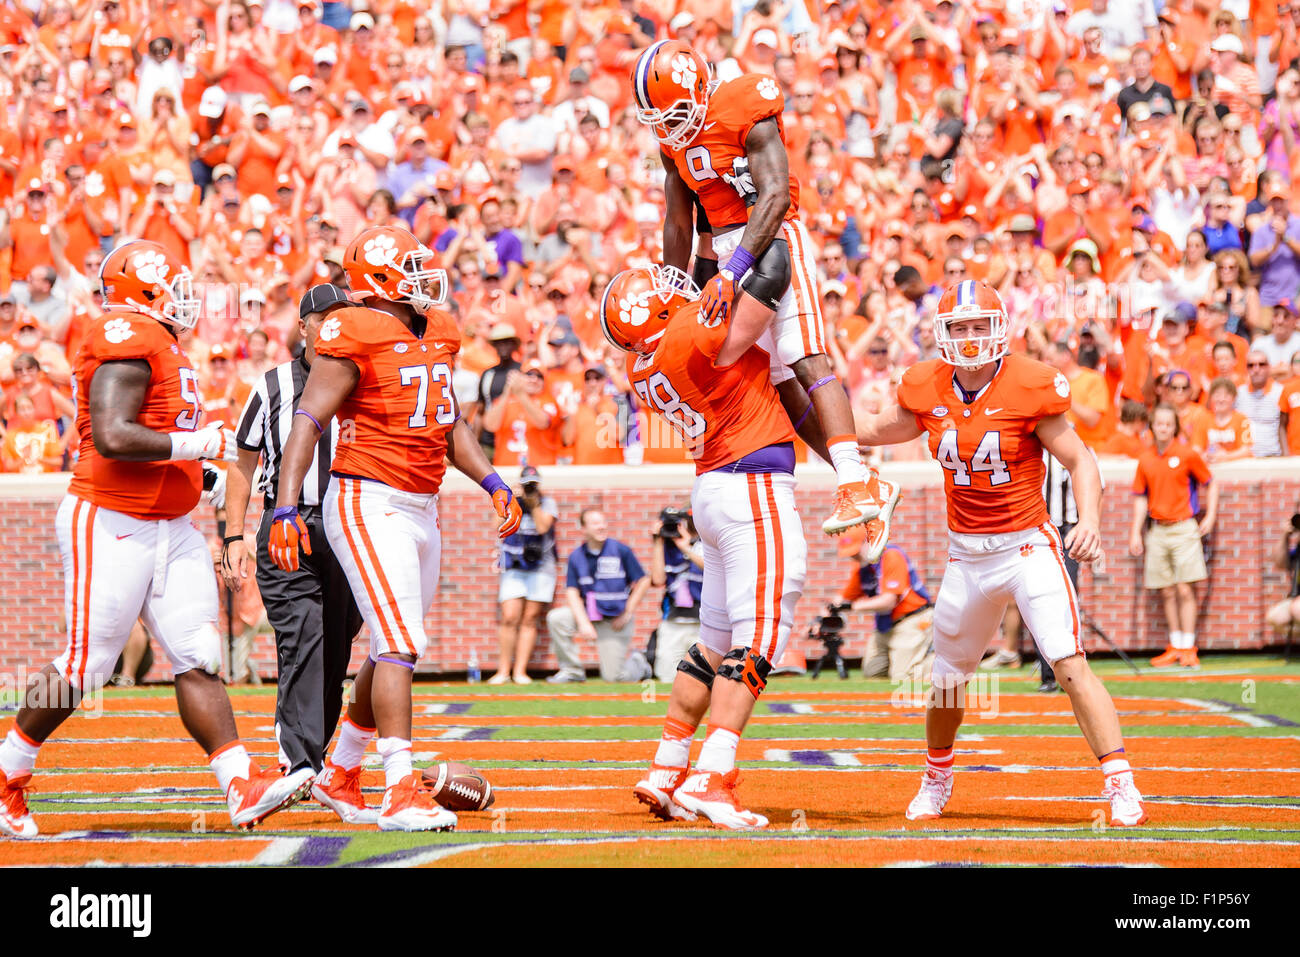 Clemson Tigers running back Wayne Gallman (9) celebrates with his teammates after scoring a touchdown in action during the NCAA Football game between Wofford Terriers and Clemson Tigers at Death Valley in Clemson, SC. David Grooms/CSM Stock Photo